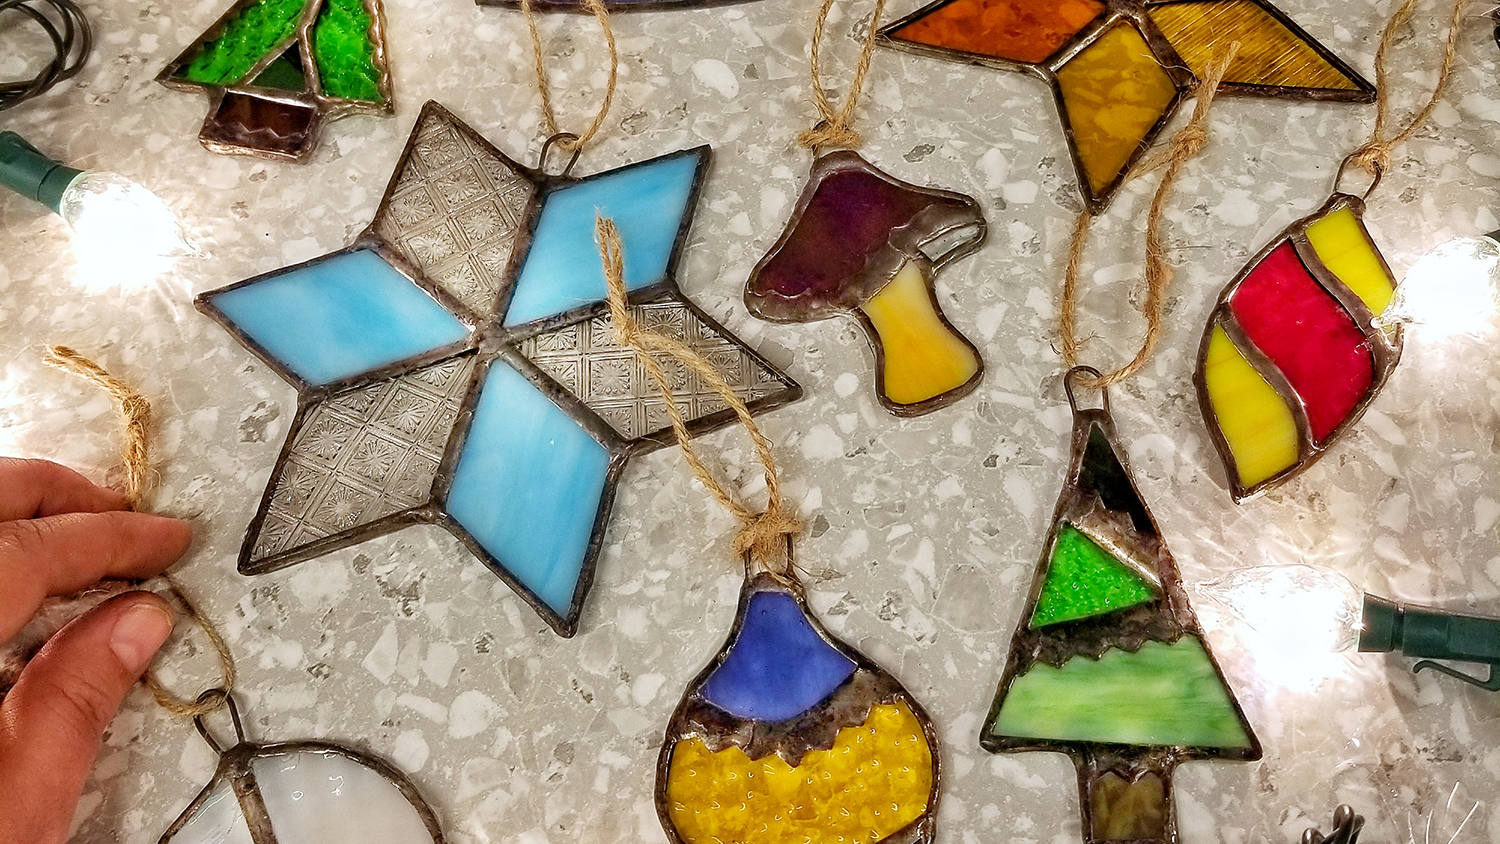 Several stained glass hanging ornaments lay on a table.